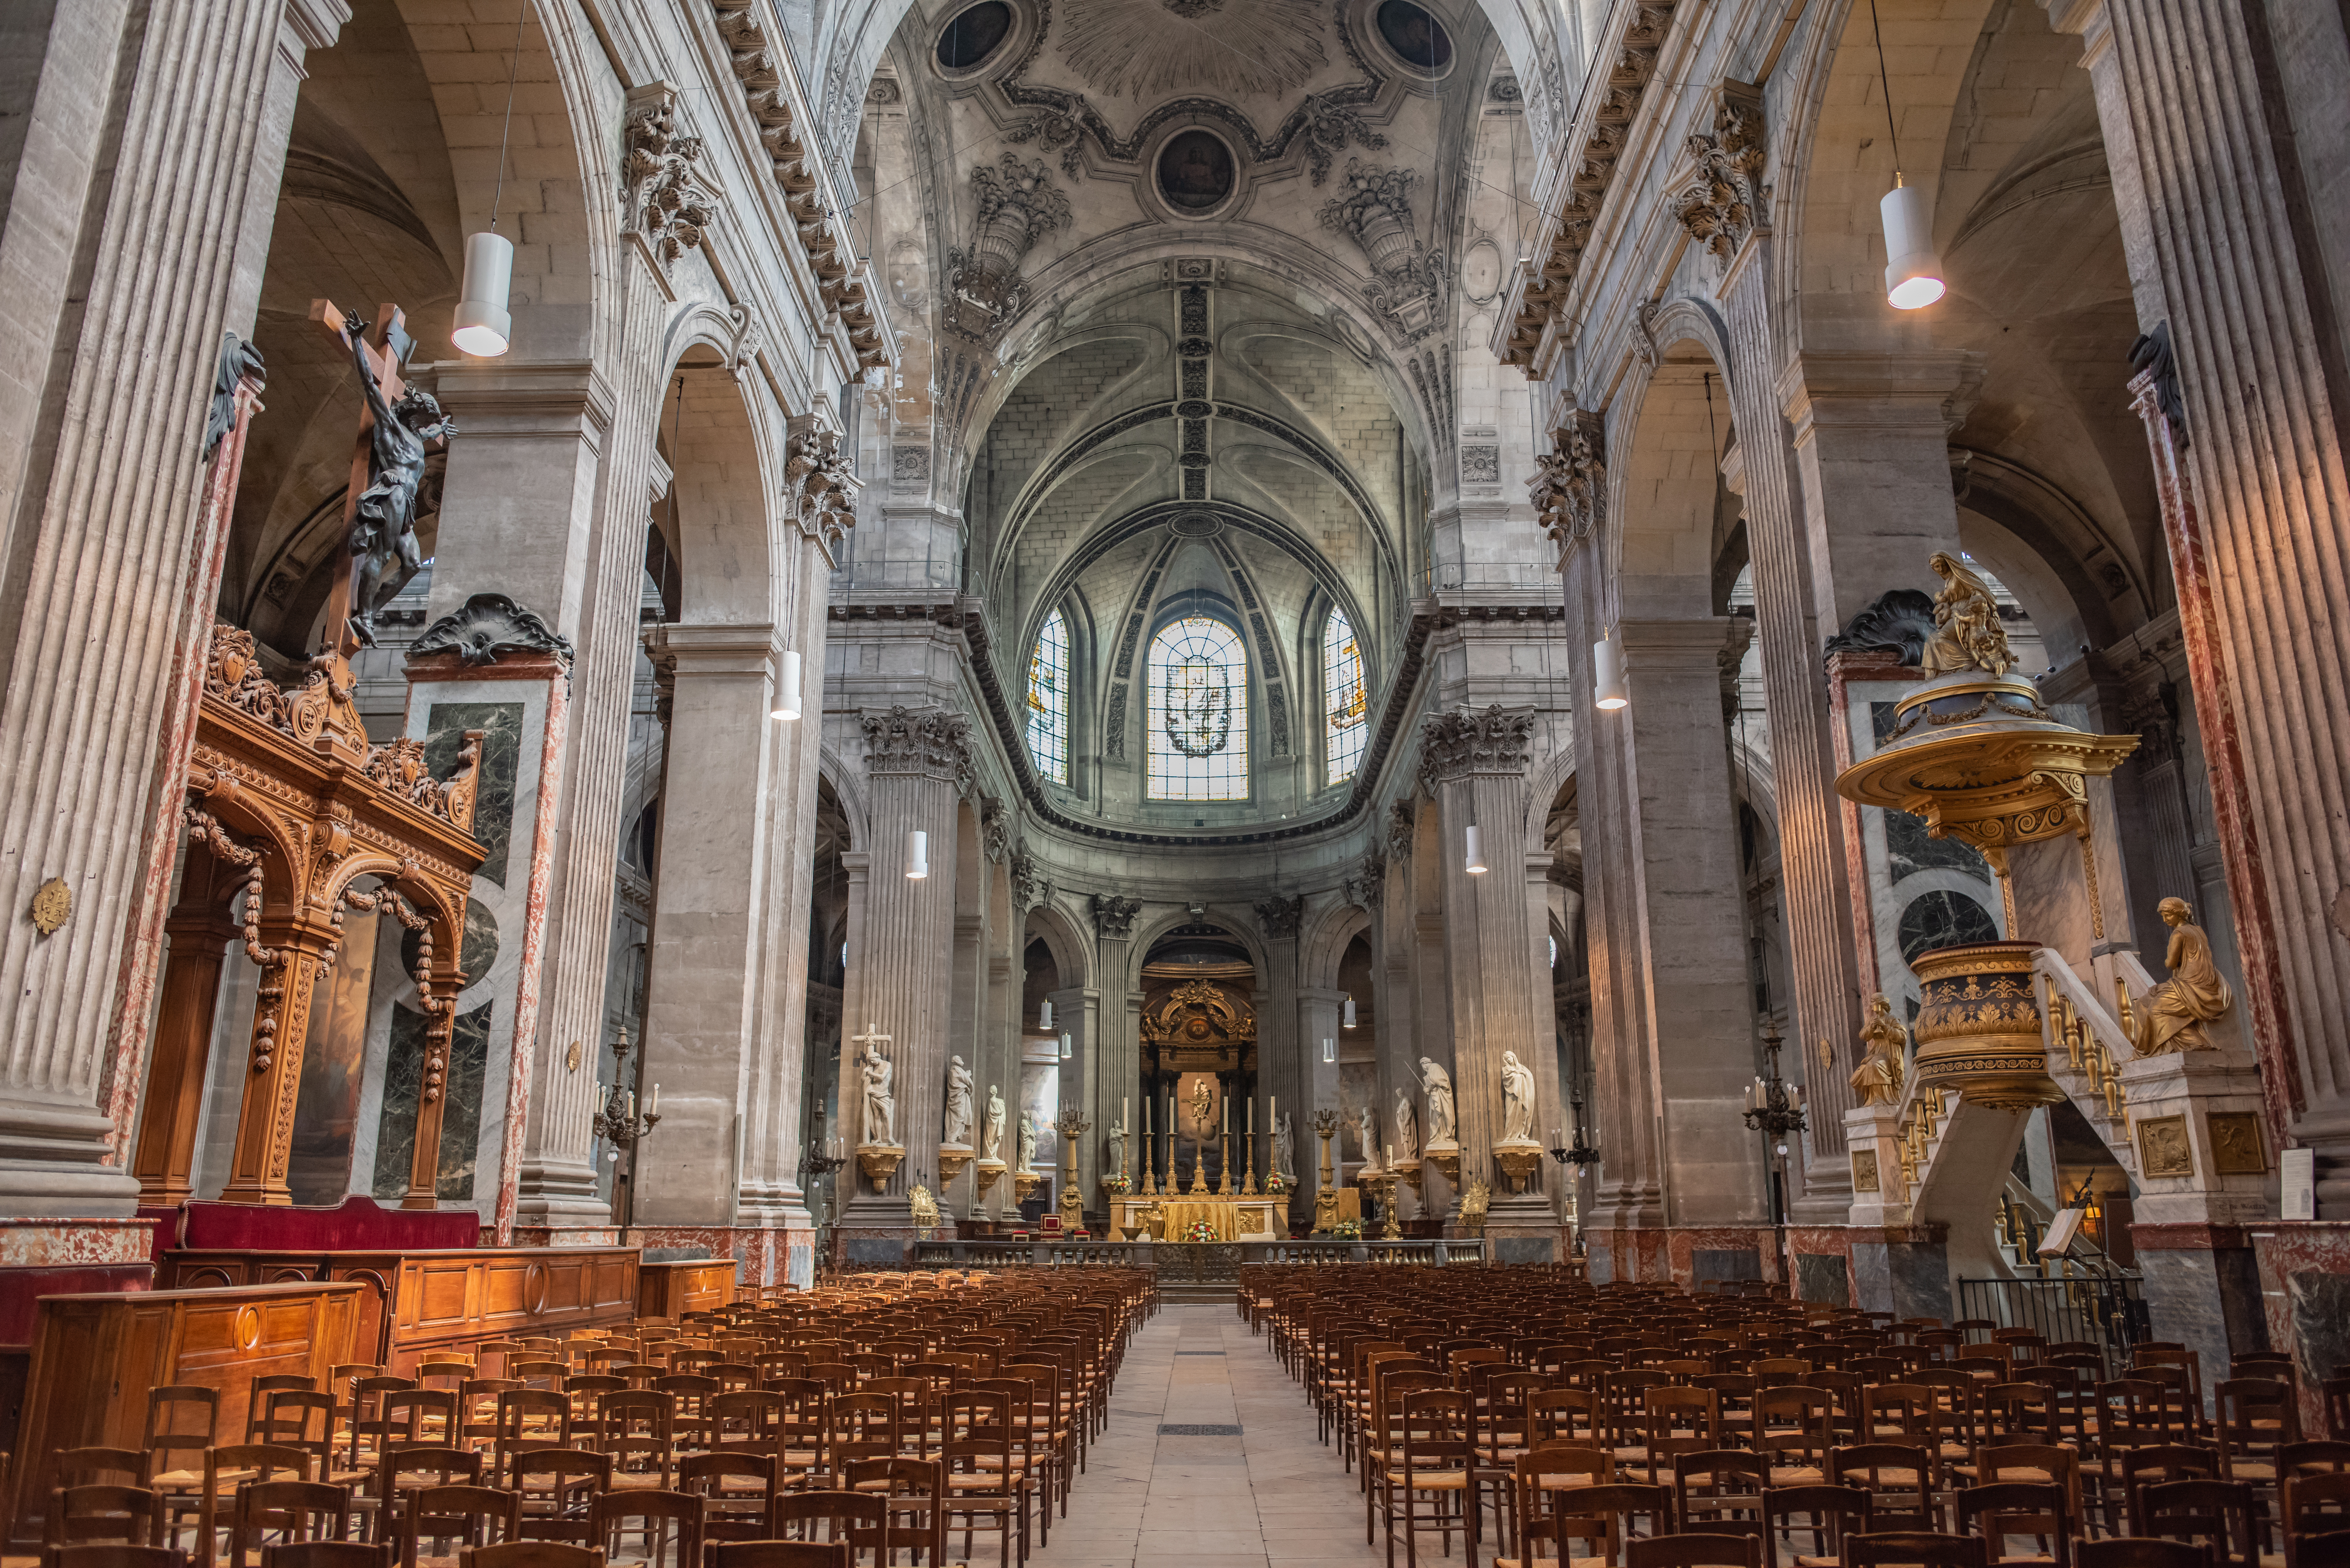 The interior of the famous and historic Saint Sulpice church, located in the Saint-Germain des Pres neighborhood (Page Light Studios/Shutterstock)